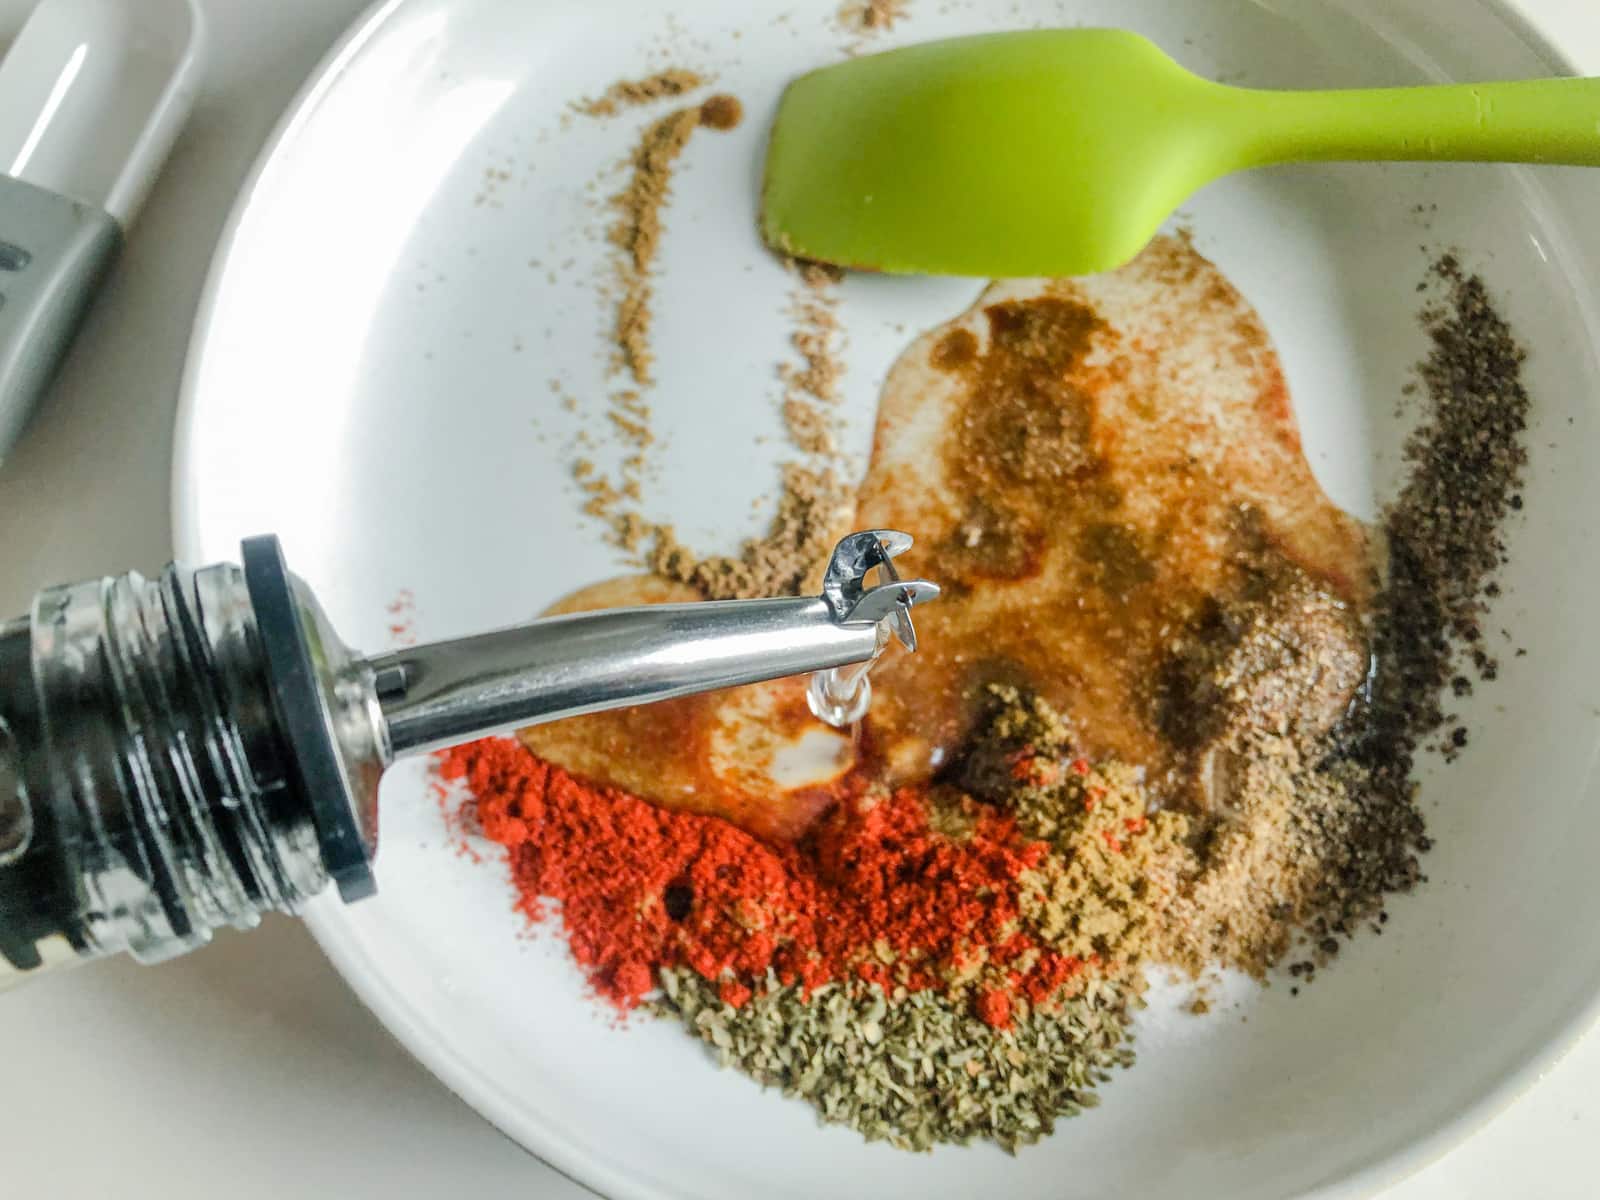 Mixing sunflower oil with spices to make a paste.